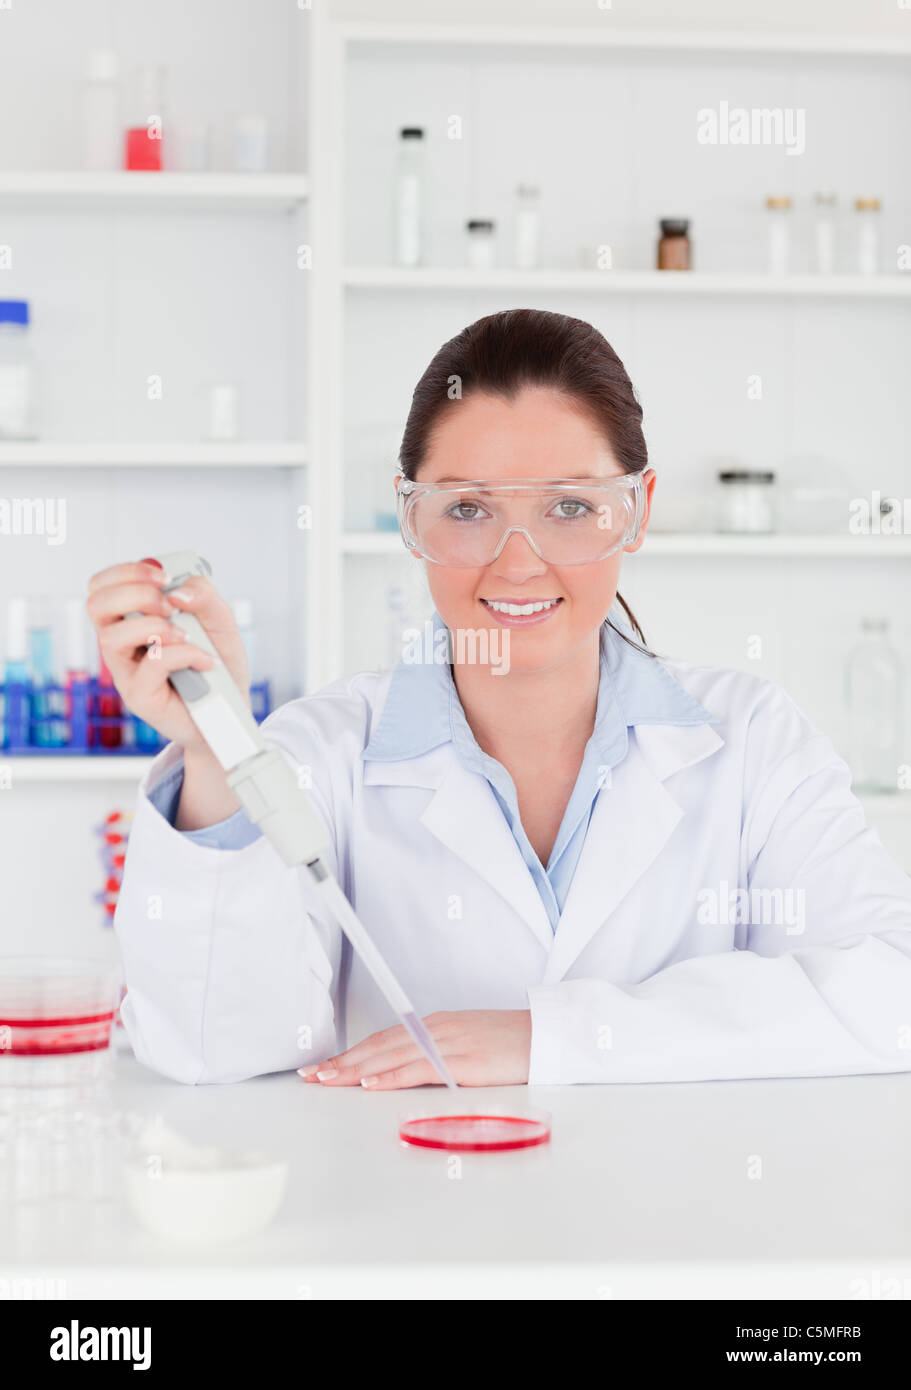 Young scientist preparing a sample Stock Photo